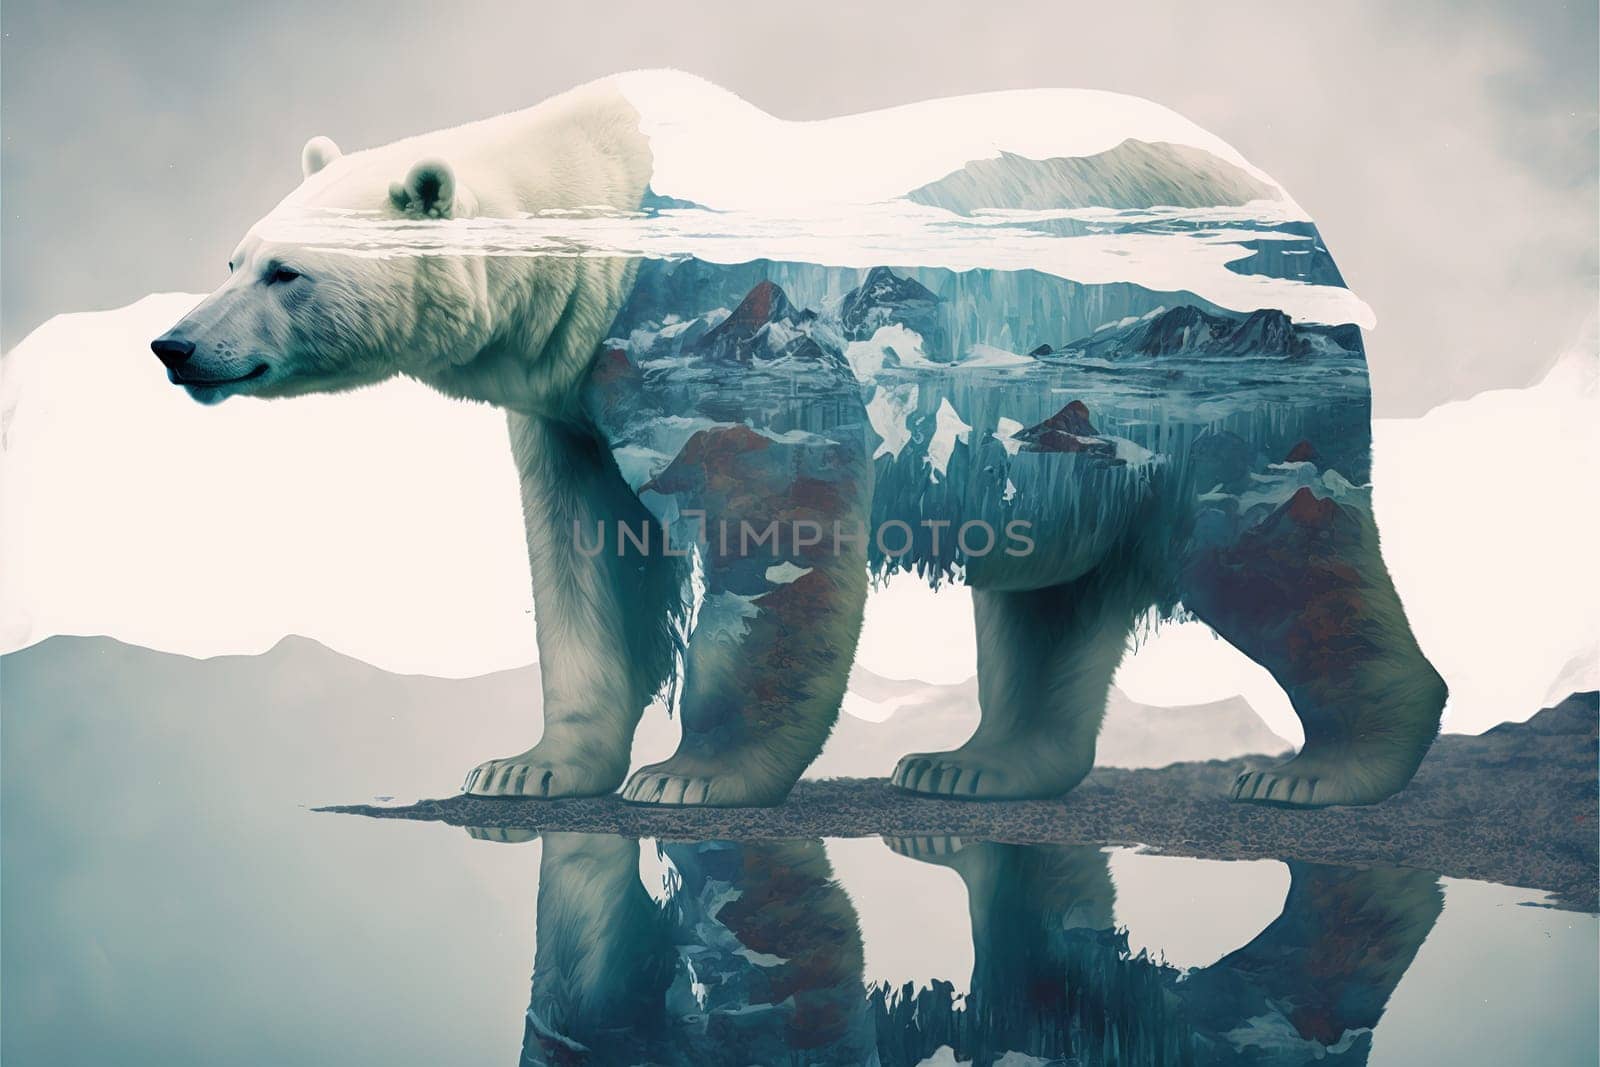 Wondrous image shown by polar bear suffer from climate change in double exposure by biancoblue